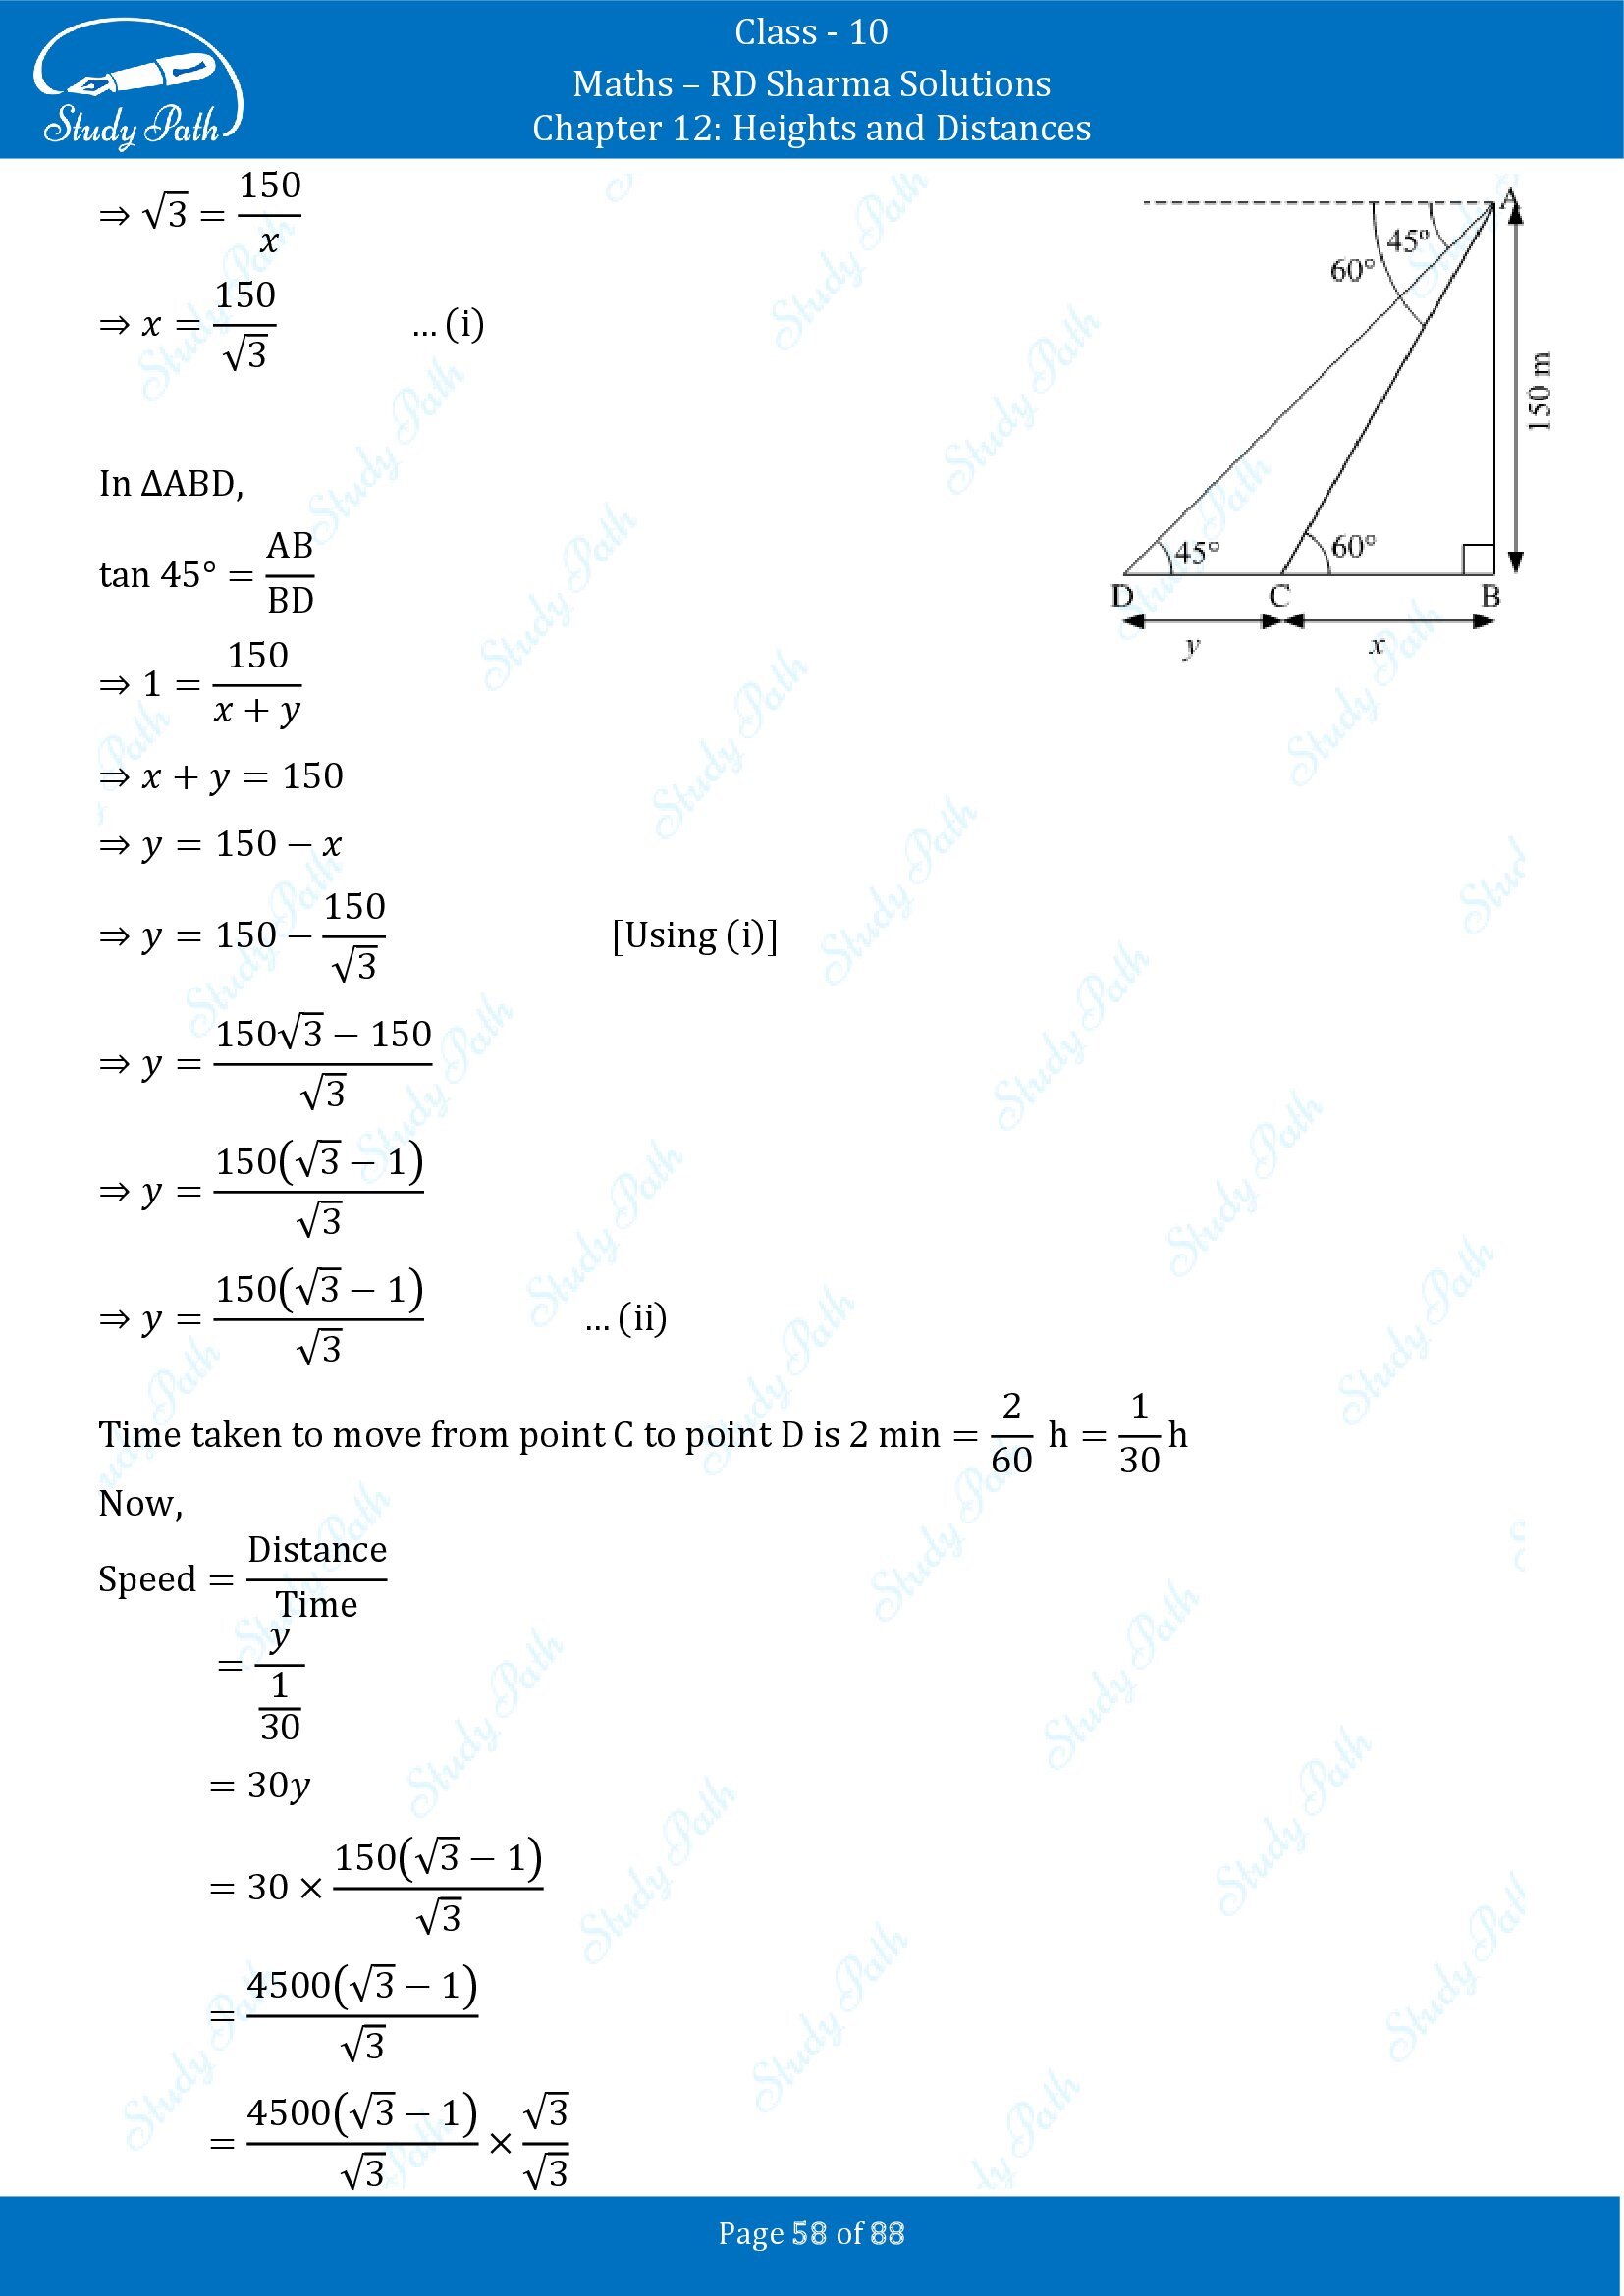 RD Sharma Solutions Class 10 Chapter 12 Heights and Distances Exercise 12.1 00058